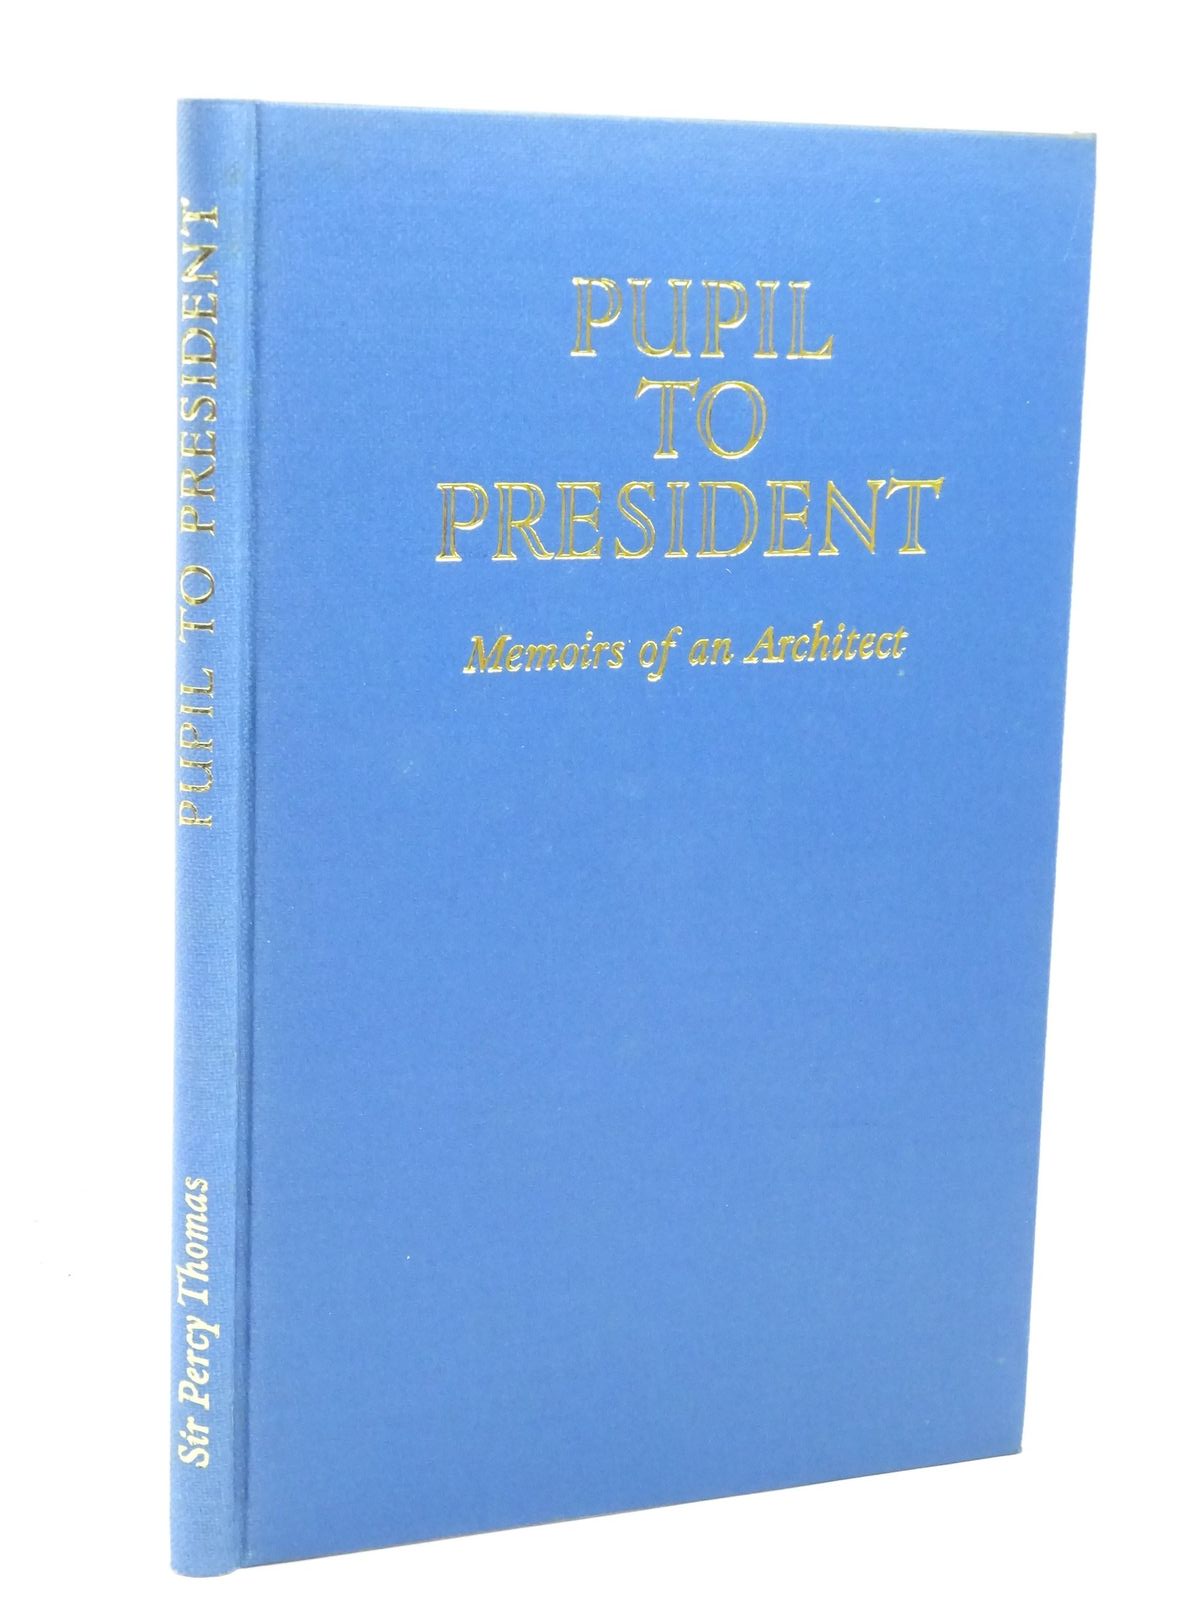 Photo of PUPIL TO PRESIDENT written by Thomas, Percy published by F. Lewis Publishers Limited (STOCK CODE: 1317973)  for sale by Stella & Rose's Books